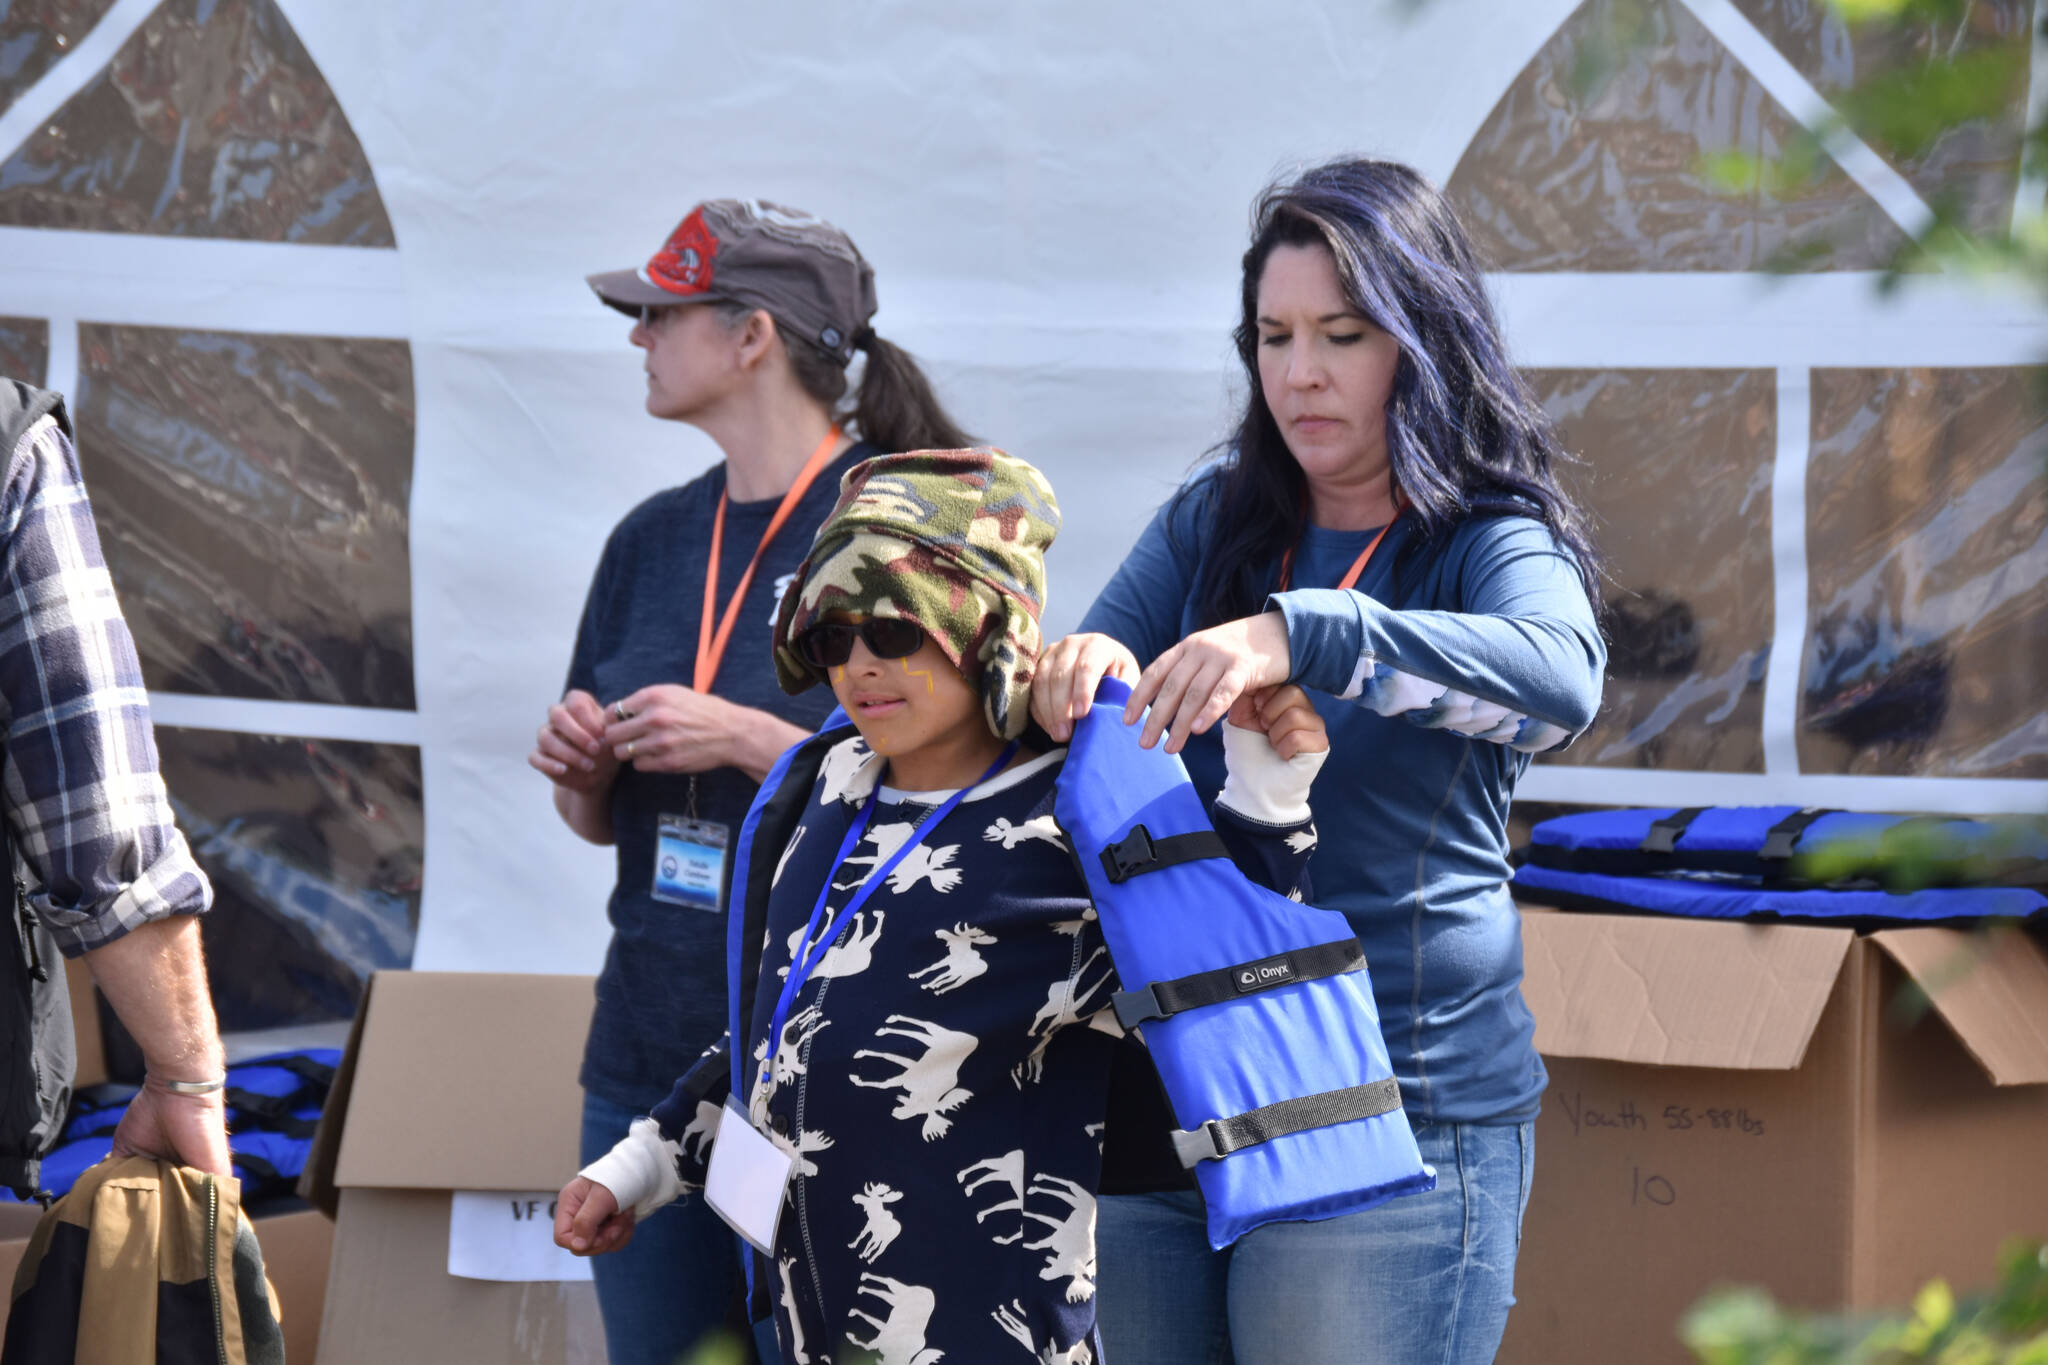 Summer Lazenby fits a child with a life jacket at the Kenai River Junior Classic in Soldotna, Alaska, on Aug. 10, 2022. (Jake Dye/Peninsula Clarion)